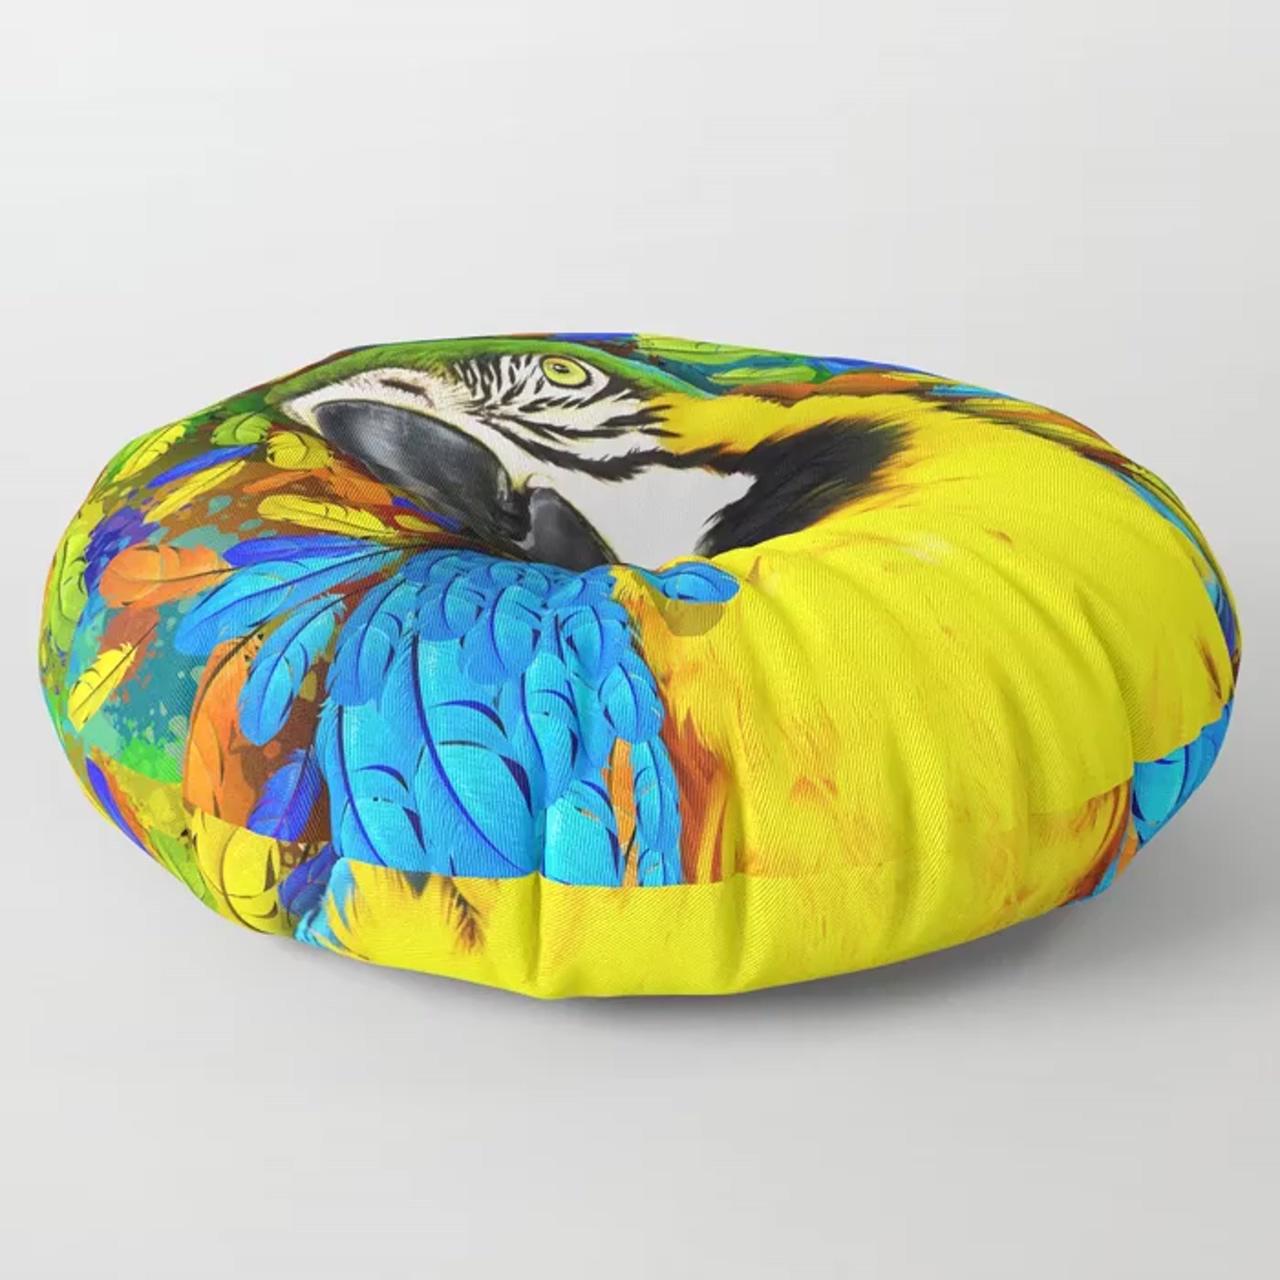 Gold and blue macaw parrot fantasy floor pillow; pop art posters